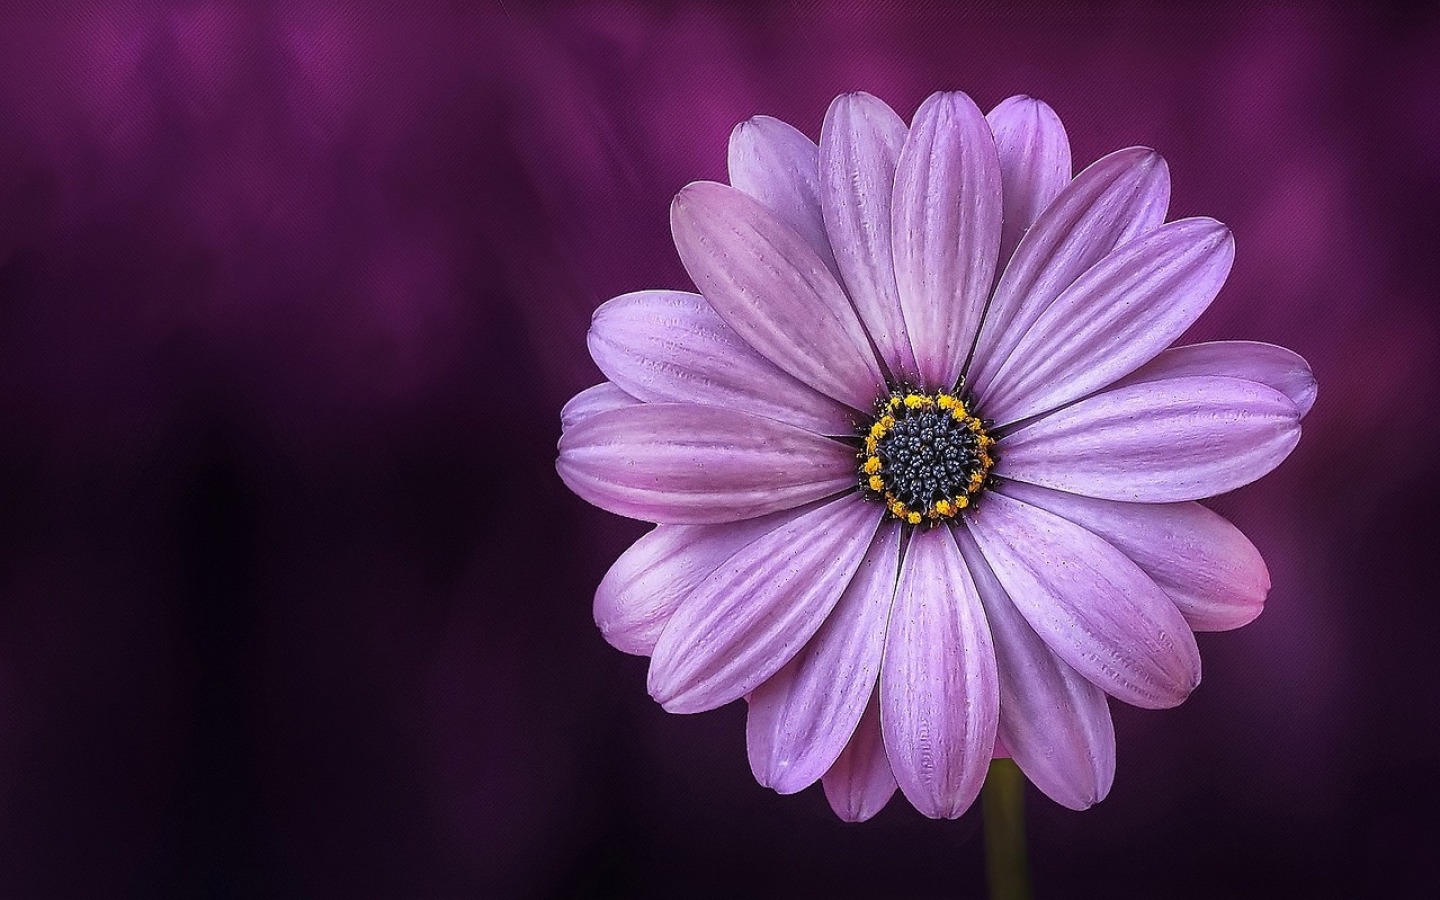 Purple Daisy Flower One Plus 5T, Honor 7x, Honor view Lg Q6 HD 4k Wallpaper, Image, Background, Photo and Picture